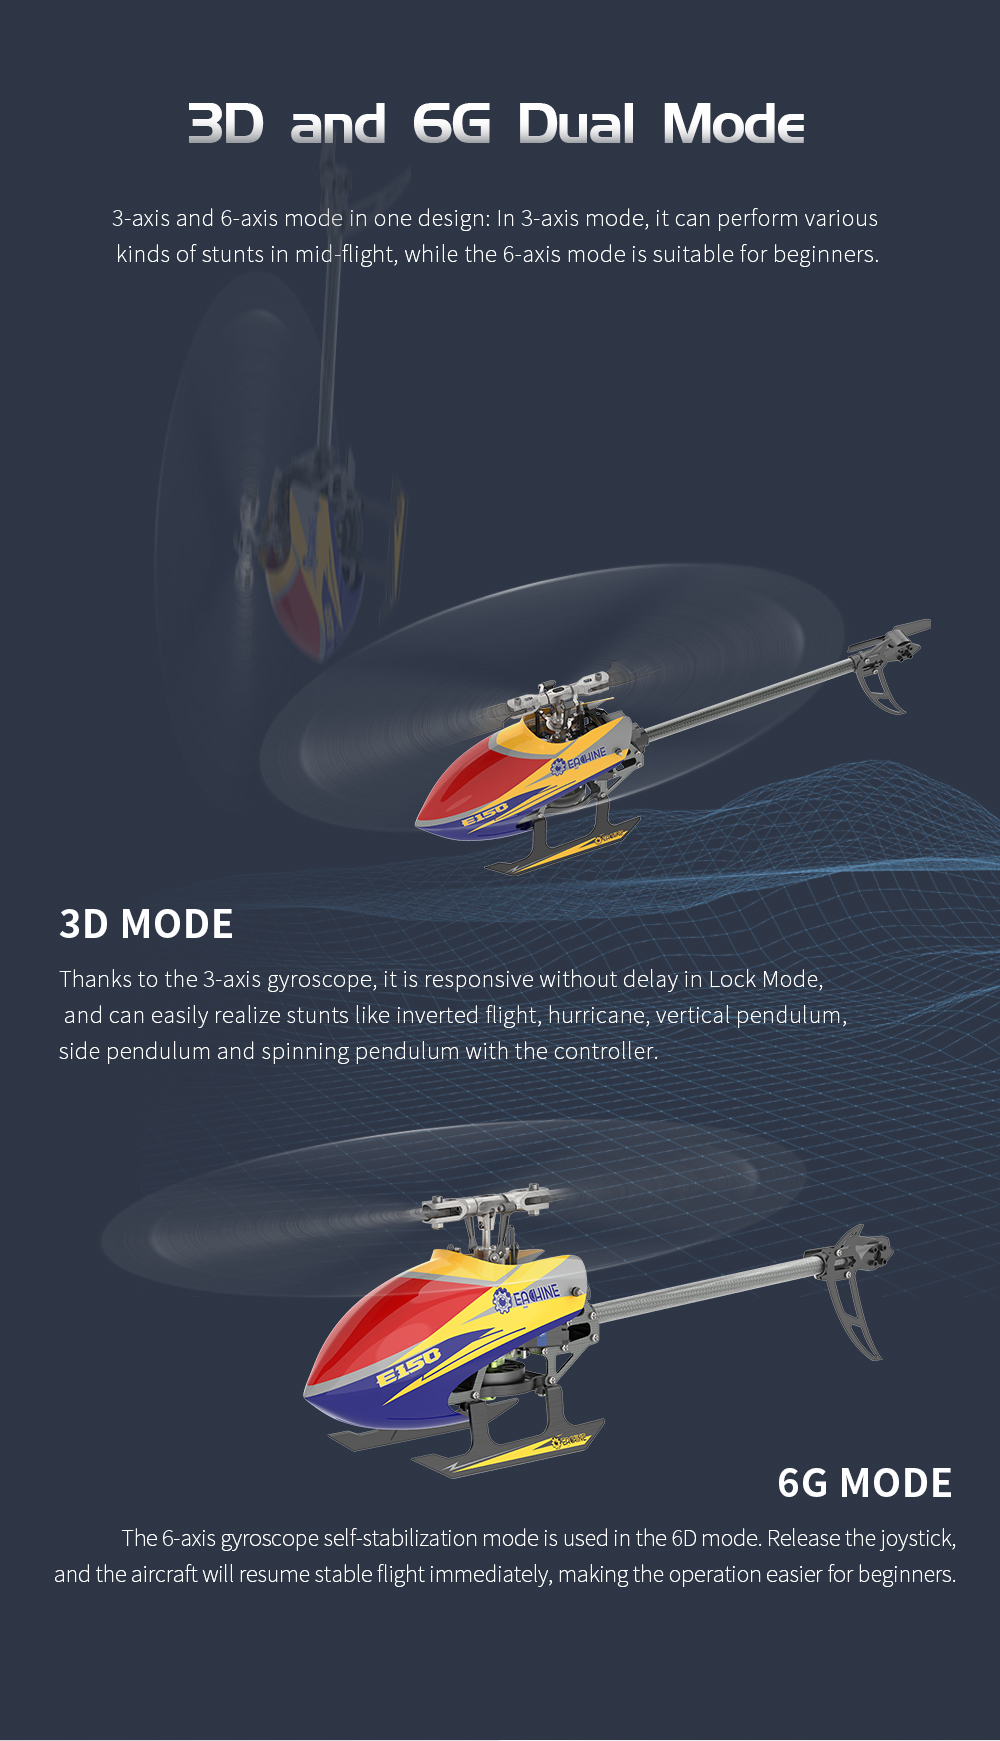 Eachine-E150-24G-6CH-6-Axis-Gyro-3D6G-Dual-Brushless-Direct-Drive-Motor-Flybarless-RC-Helicopter-RTF-1900368-9